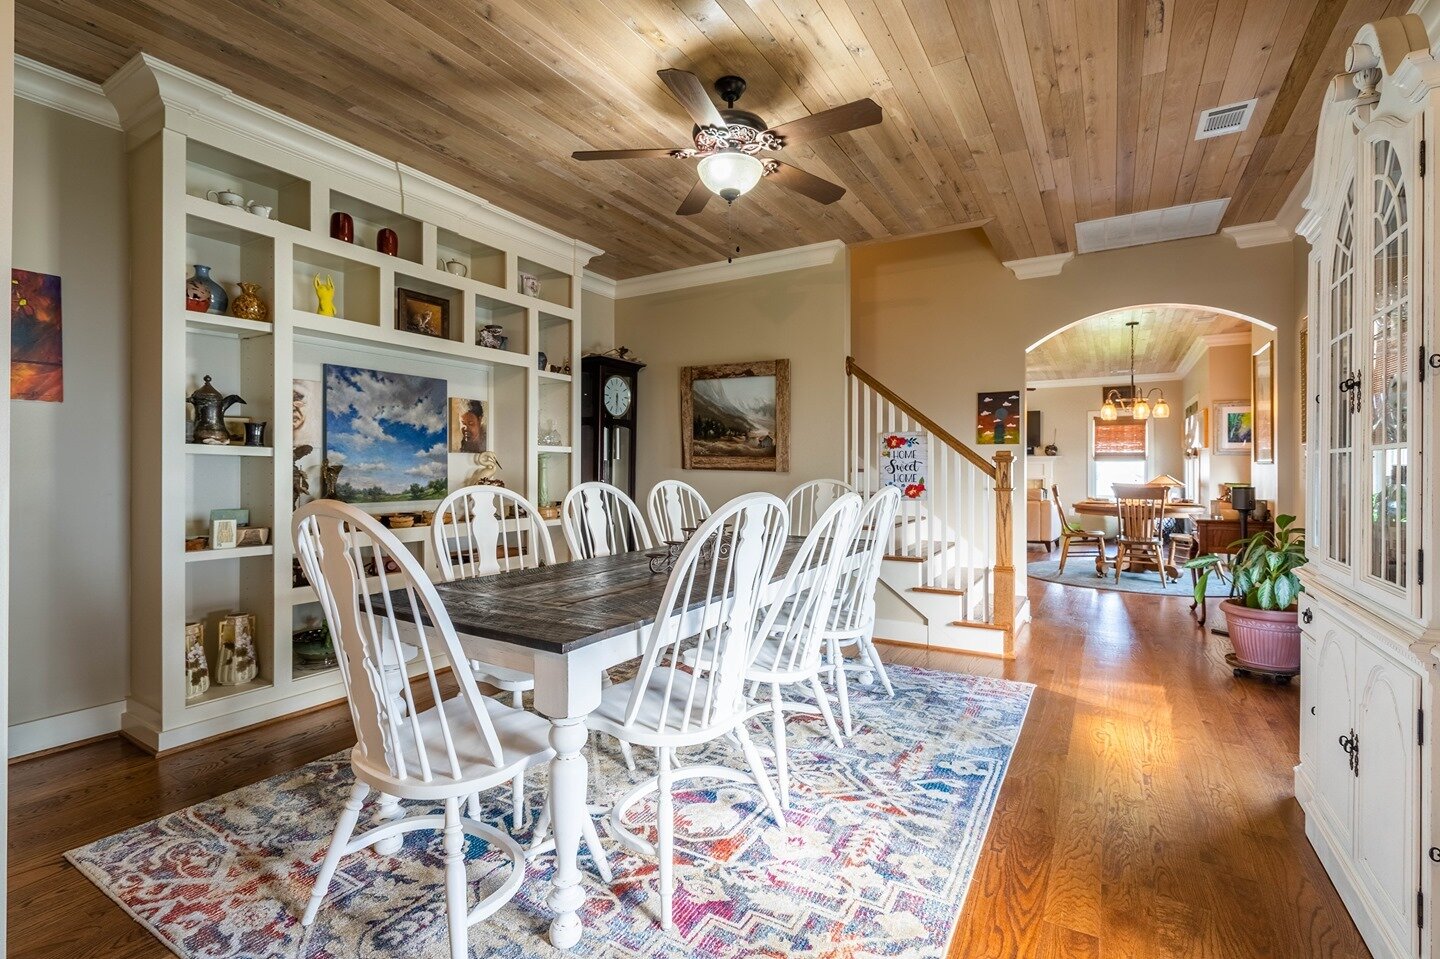 It is the little touches that make a house. Like the wooden ceiling throughout this house! ⁠
⁠
Listed by Josie Young⁠
⁠
#Wallaceandmoody #justlisted #motgomeryhomesforsale #auburnhomes⁠
#prattvillehomes #realtor #realtorlife #realtorsofinstagram #rea